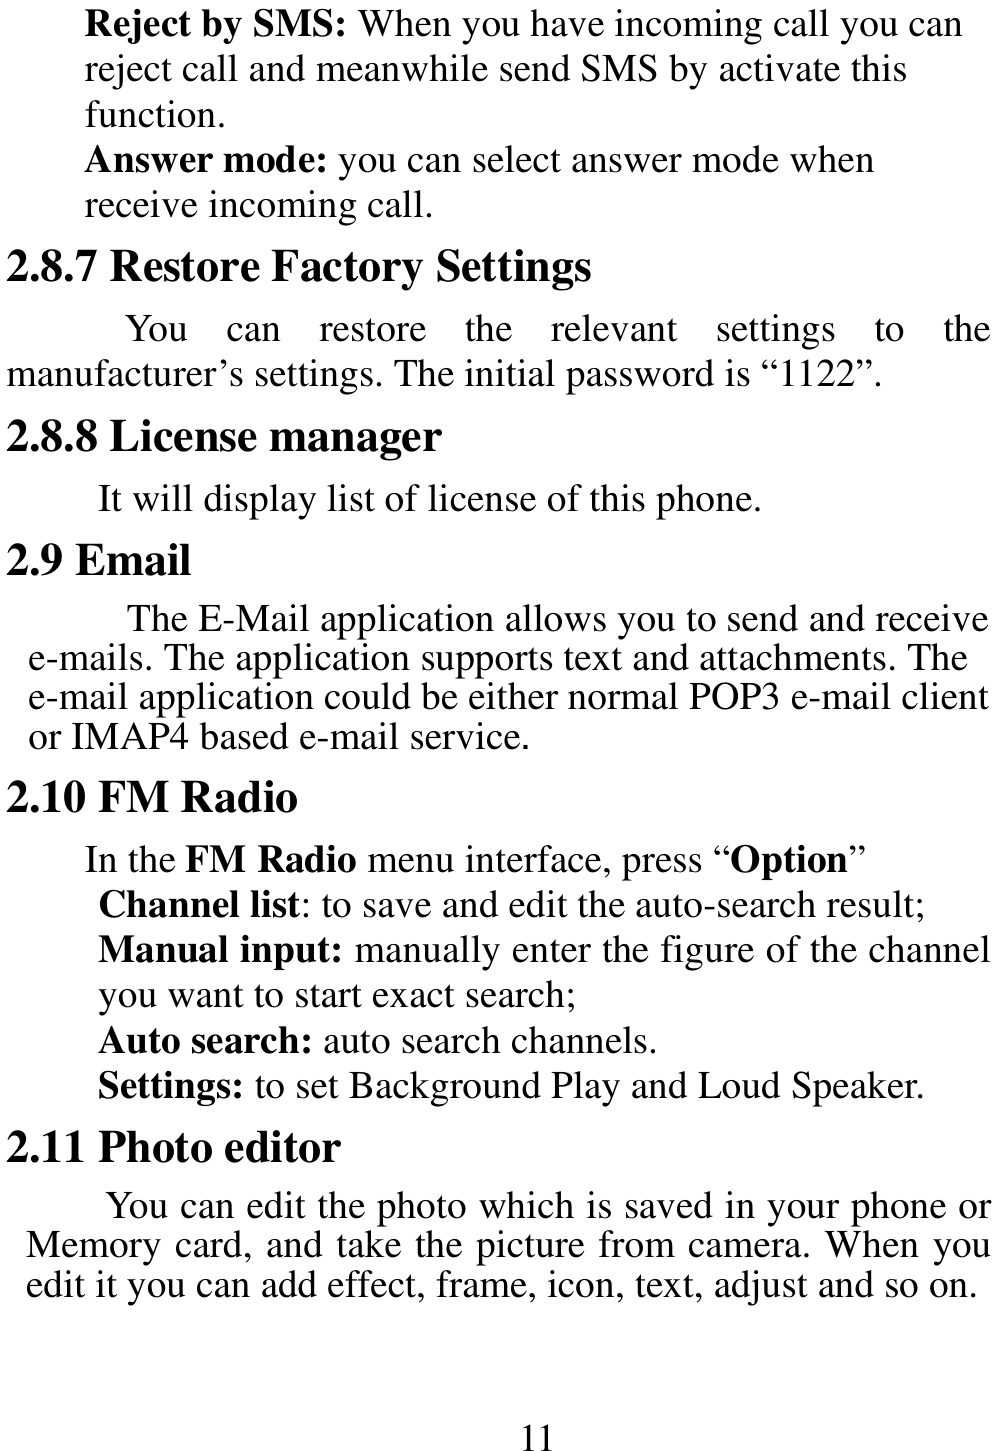                                                       11 Reject by SMS: When you have incoming call you can reject call and meanwhile send SMS by activate this function.   Answer mode: you can select answer mode when receive incoming call. 2.8.7 Restore Factory Settings You  can  restore  the  relevant  settings  to  the manufacturer’s settings. The initial password is “1122”. 2.8.8 License manager It will display list of license of this phone. 2.9 Email The E-Mail application allows you to send and receive e-mails. The application supports text and attachments. The e-mail application could be either normal POP3 e-mail client or IMAP4 based e-mail service. 2.10 FM Radio In the FM Radio menu interface, press “Option” Channel list: to save and edit the auto-search result; Manual input: manually enter the figure of the channel you want to start exact search; Auto search: auto search channels. Settings: to set Background Play and Loud Speaker. 2.11 Photo editor You can edit the photo which is saved in your phone or Memory card, and take the picture from camera. When you edit it you can add effect, frame, icon, text, adjust and so on. 